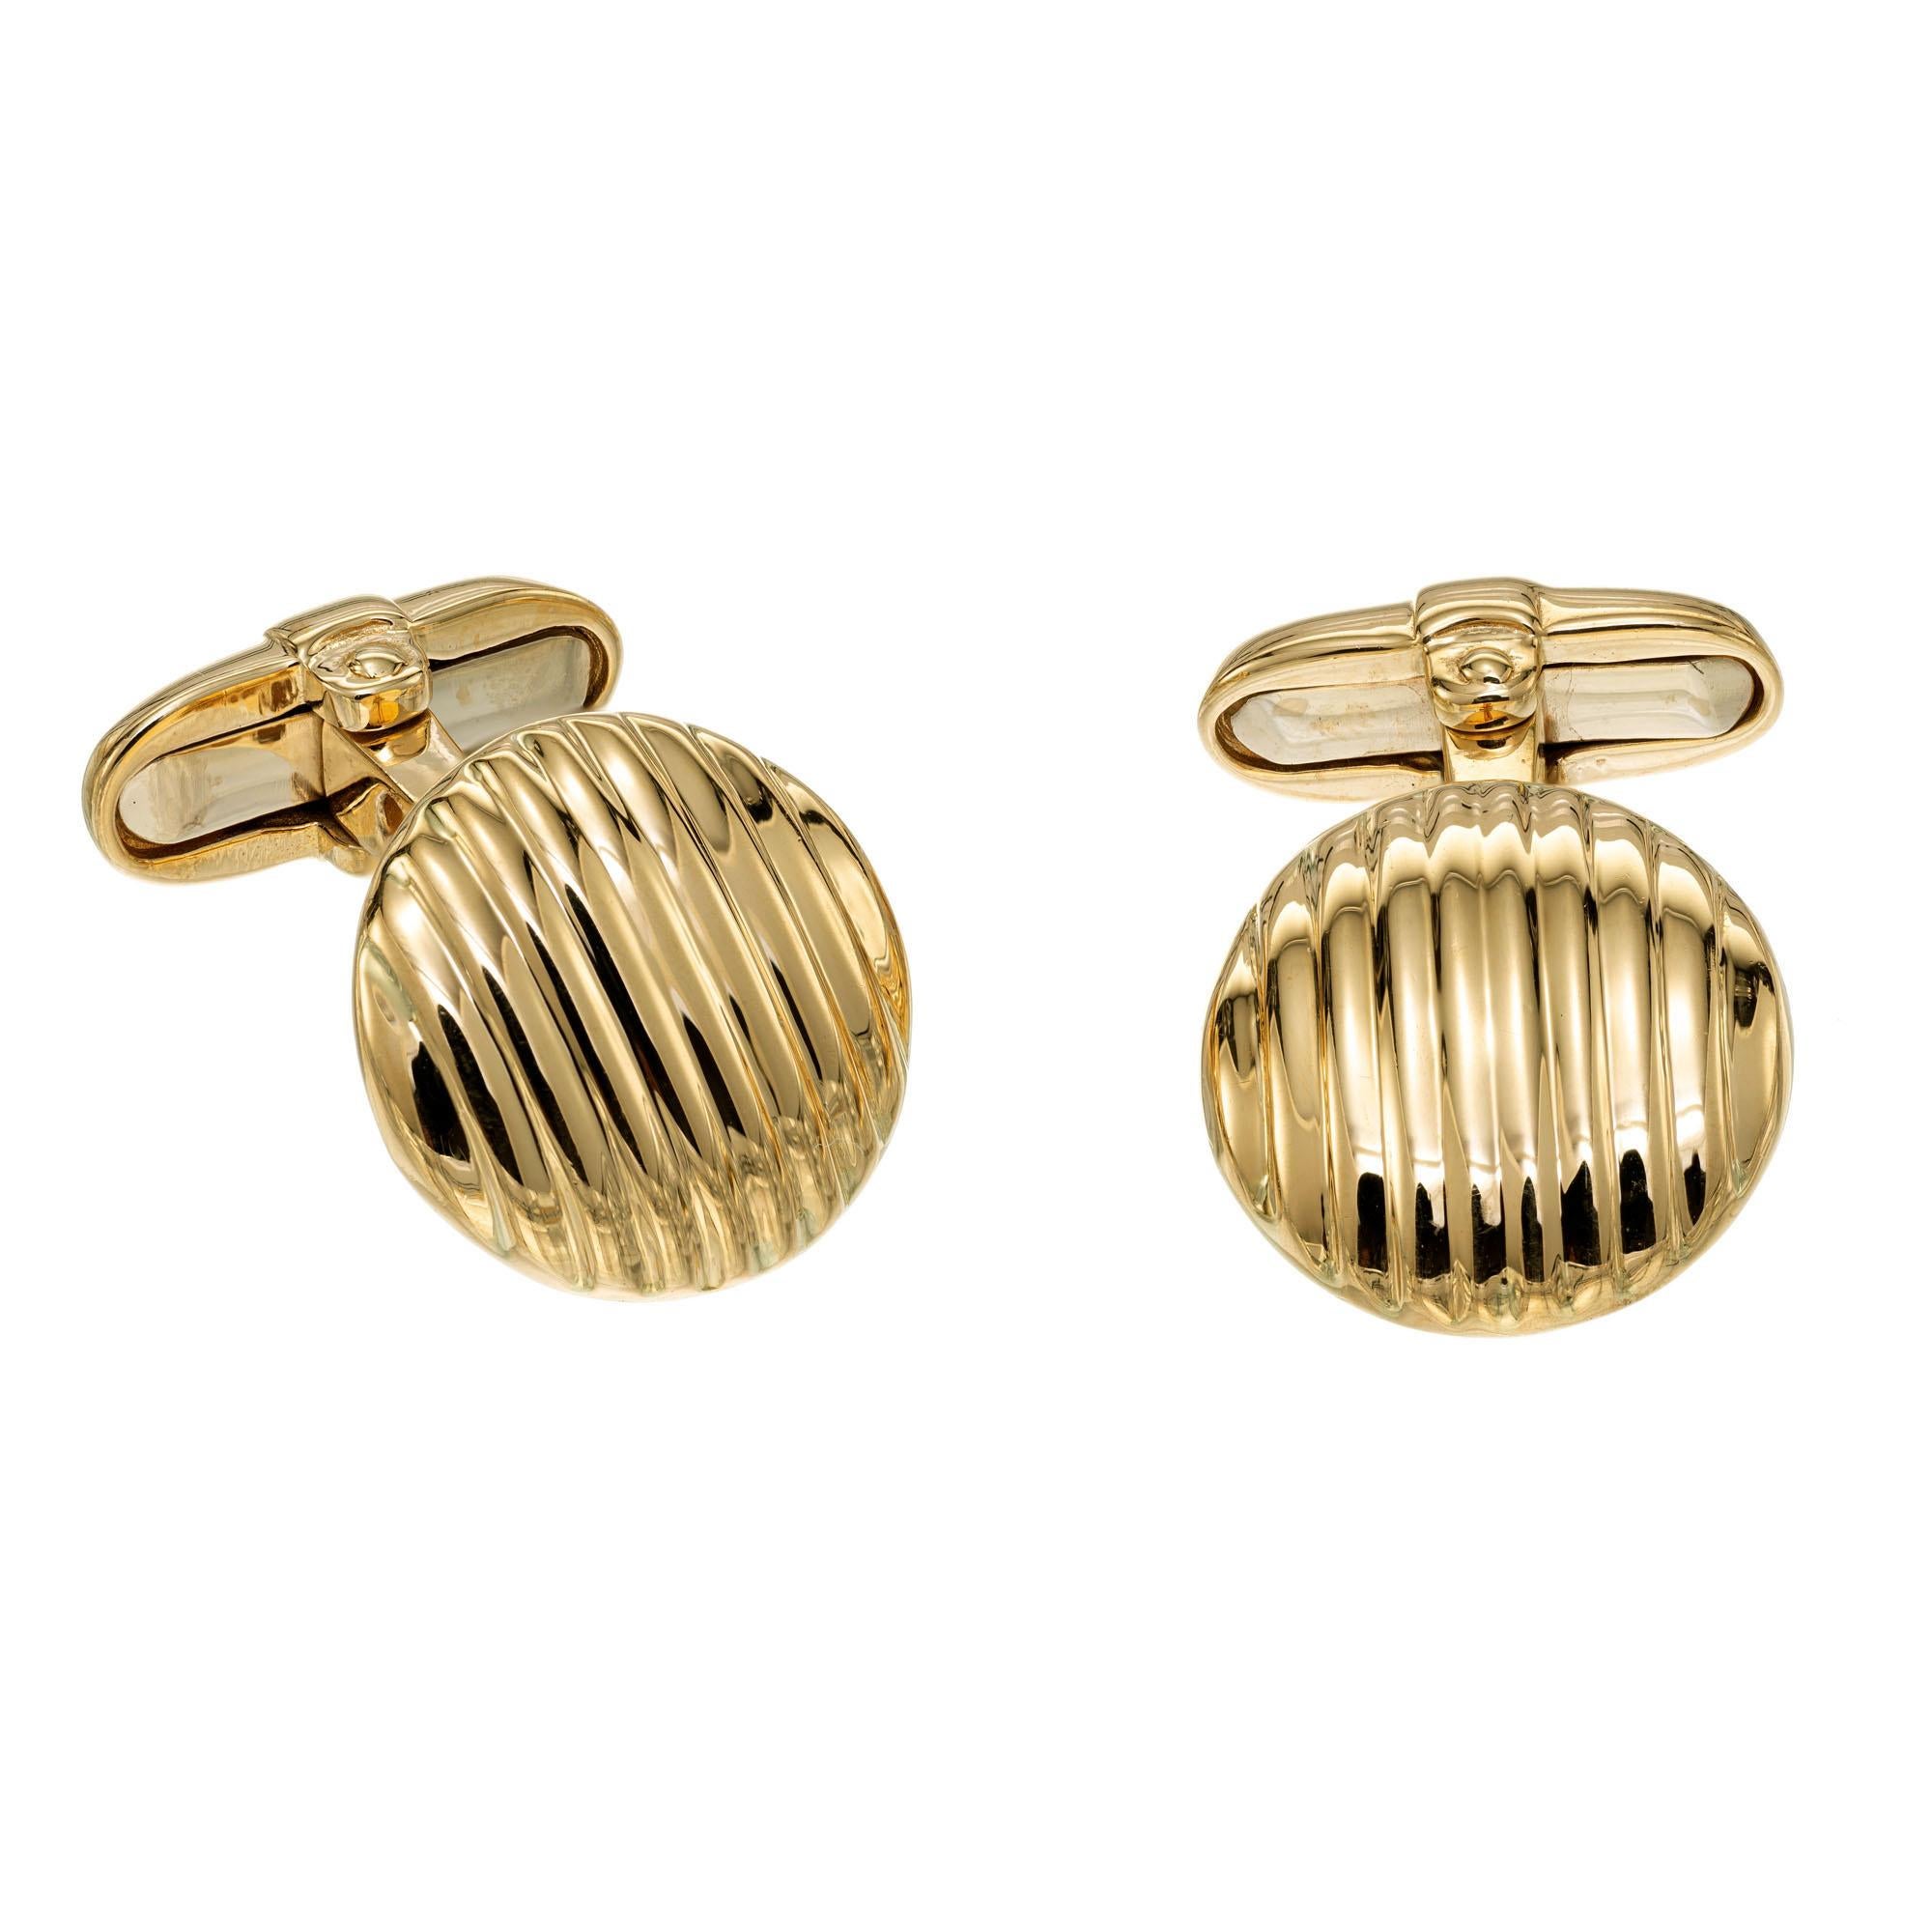 Domed round corrugated cufflinks with hinged clip backs in 18k yellow gold.

18k yellow gold
Stamped: 750
13.4 grams
Top to bottom: 16.2mm or 5/8 Inch
Width: 15.7mm or 5/8 Inch
Depth or thickness: 3.3mm

